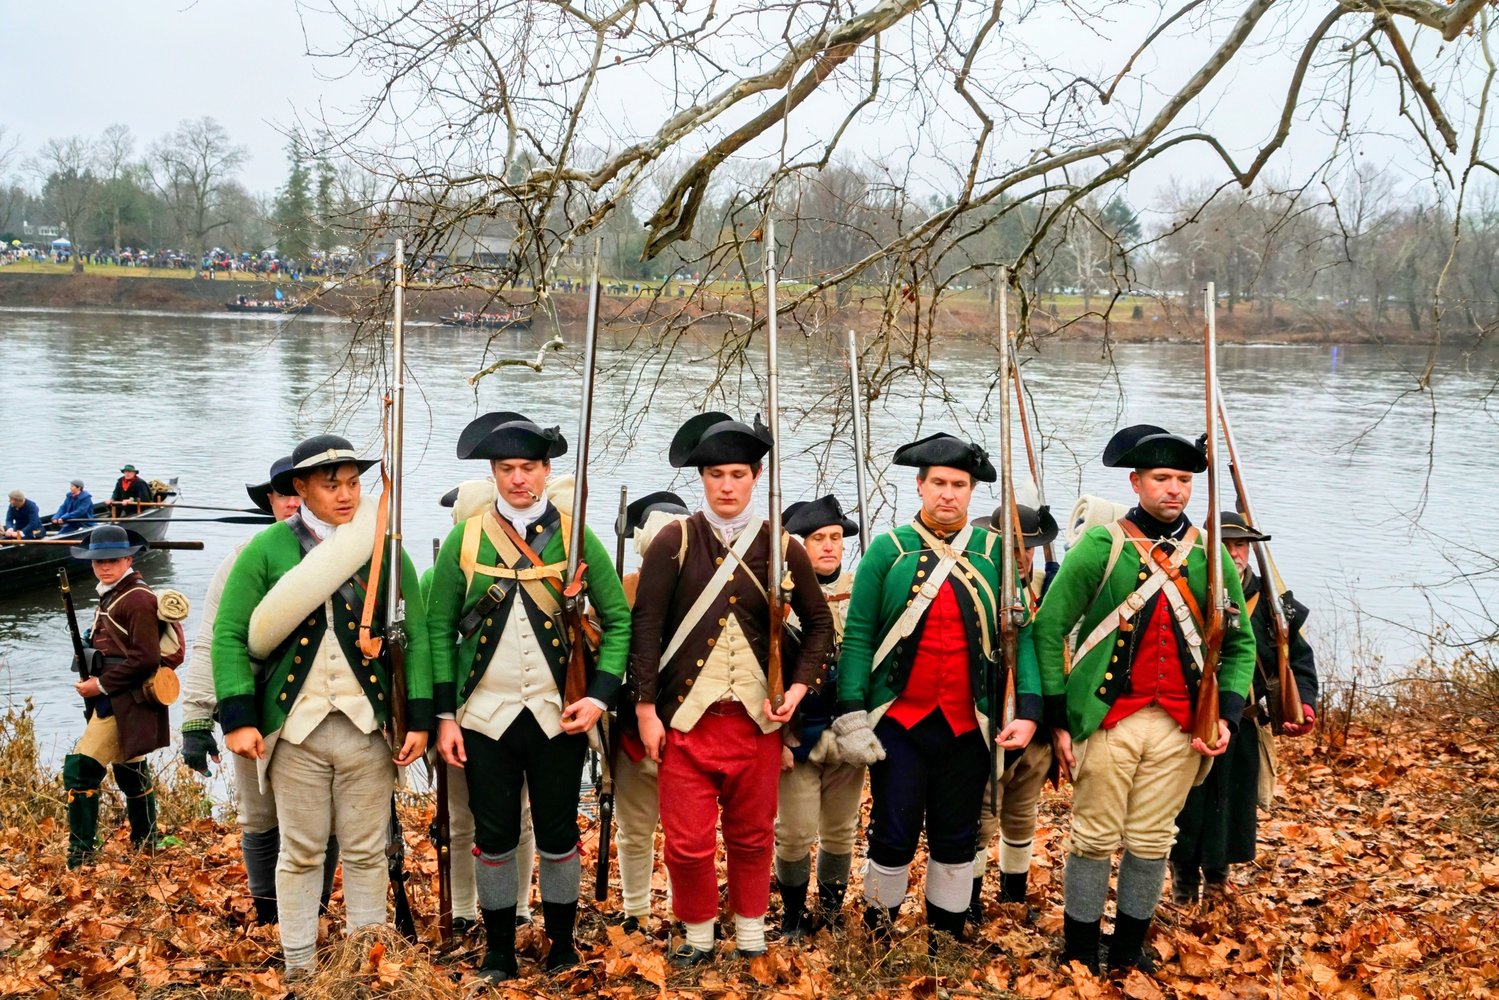 Reenactors stand at attention.